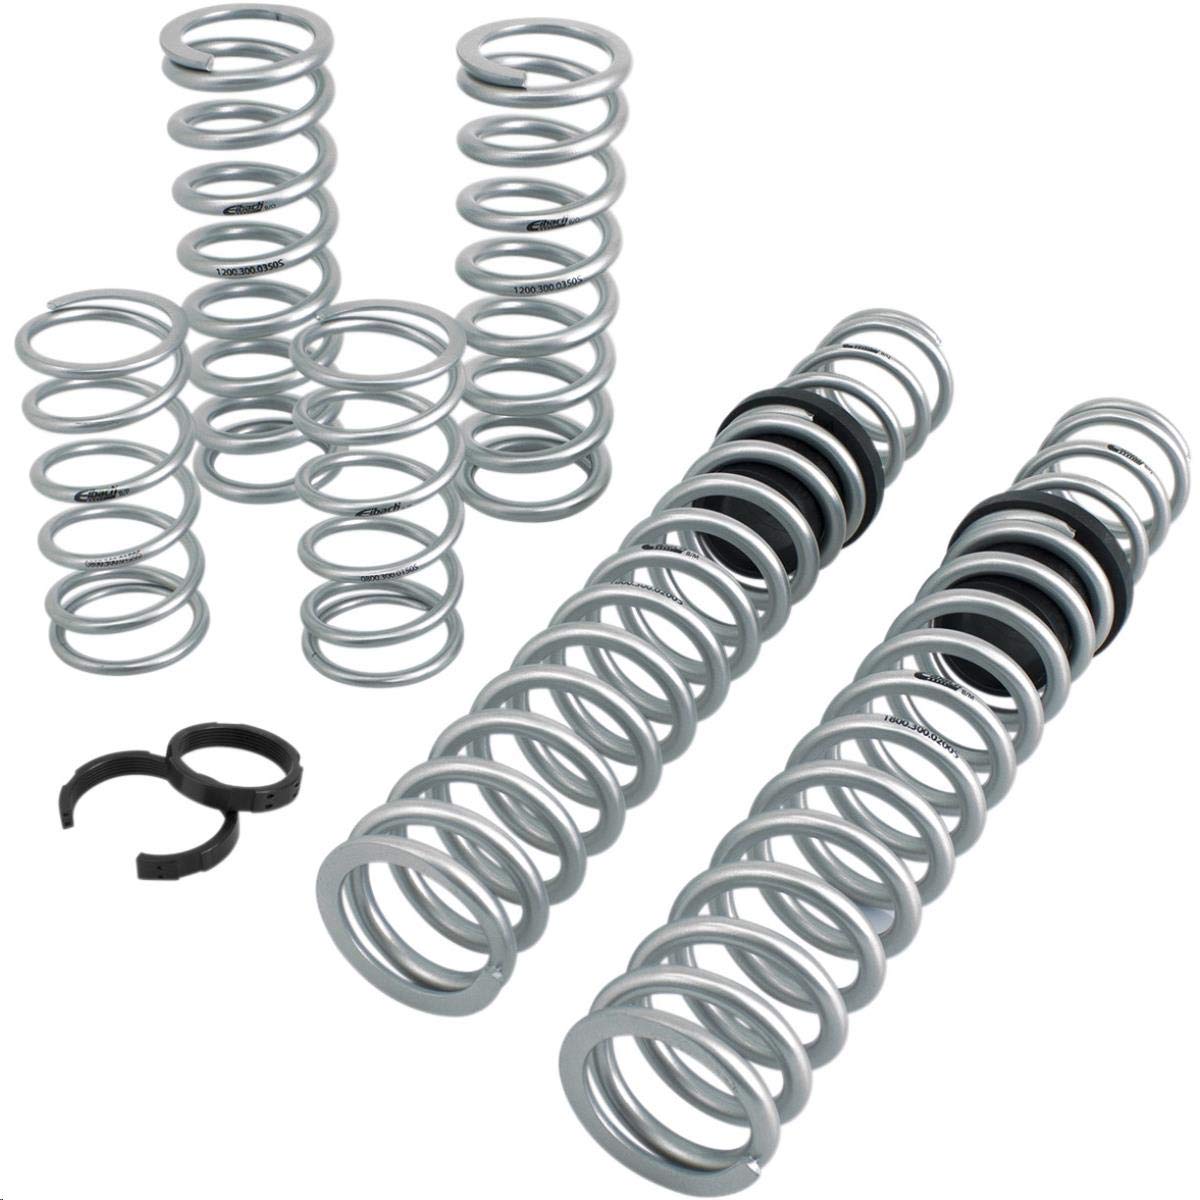 PROUTV | STAGE 3 PERFORMANCE SPRING SYSTEM (SET OF 8 SPRINGS)